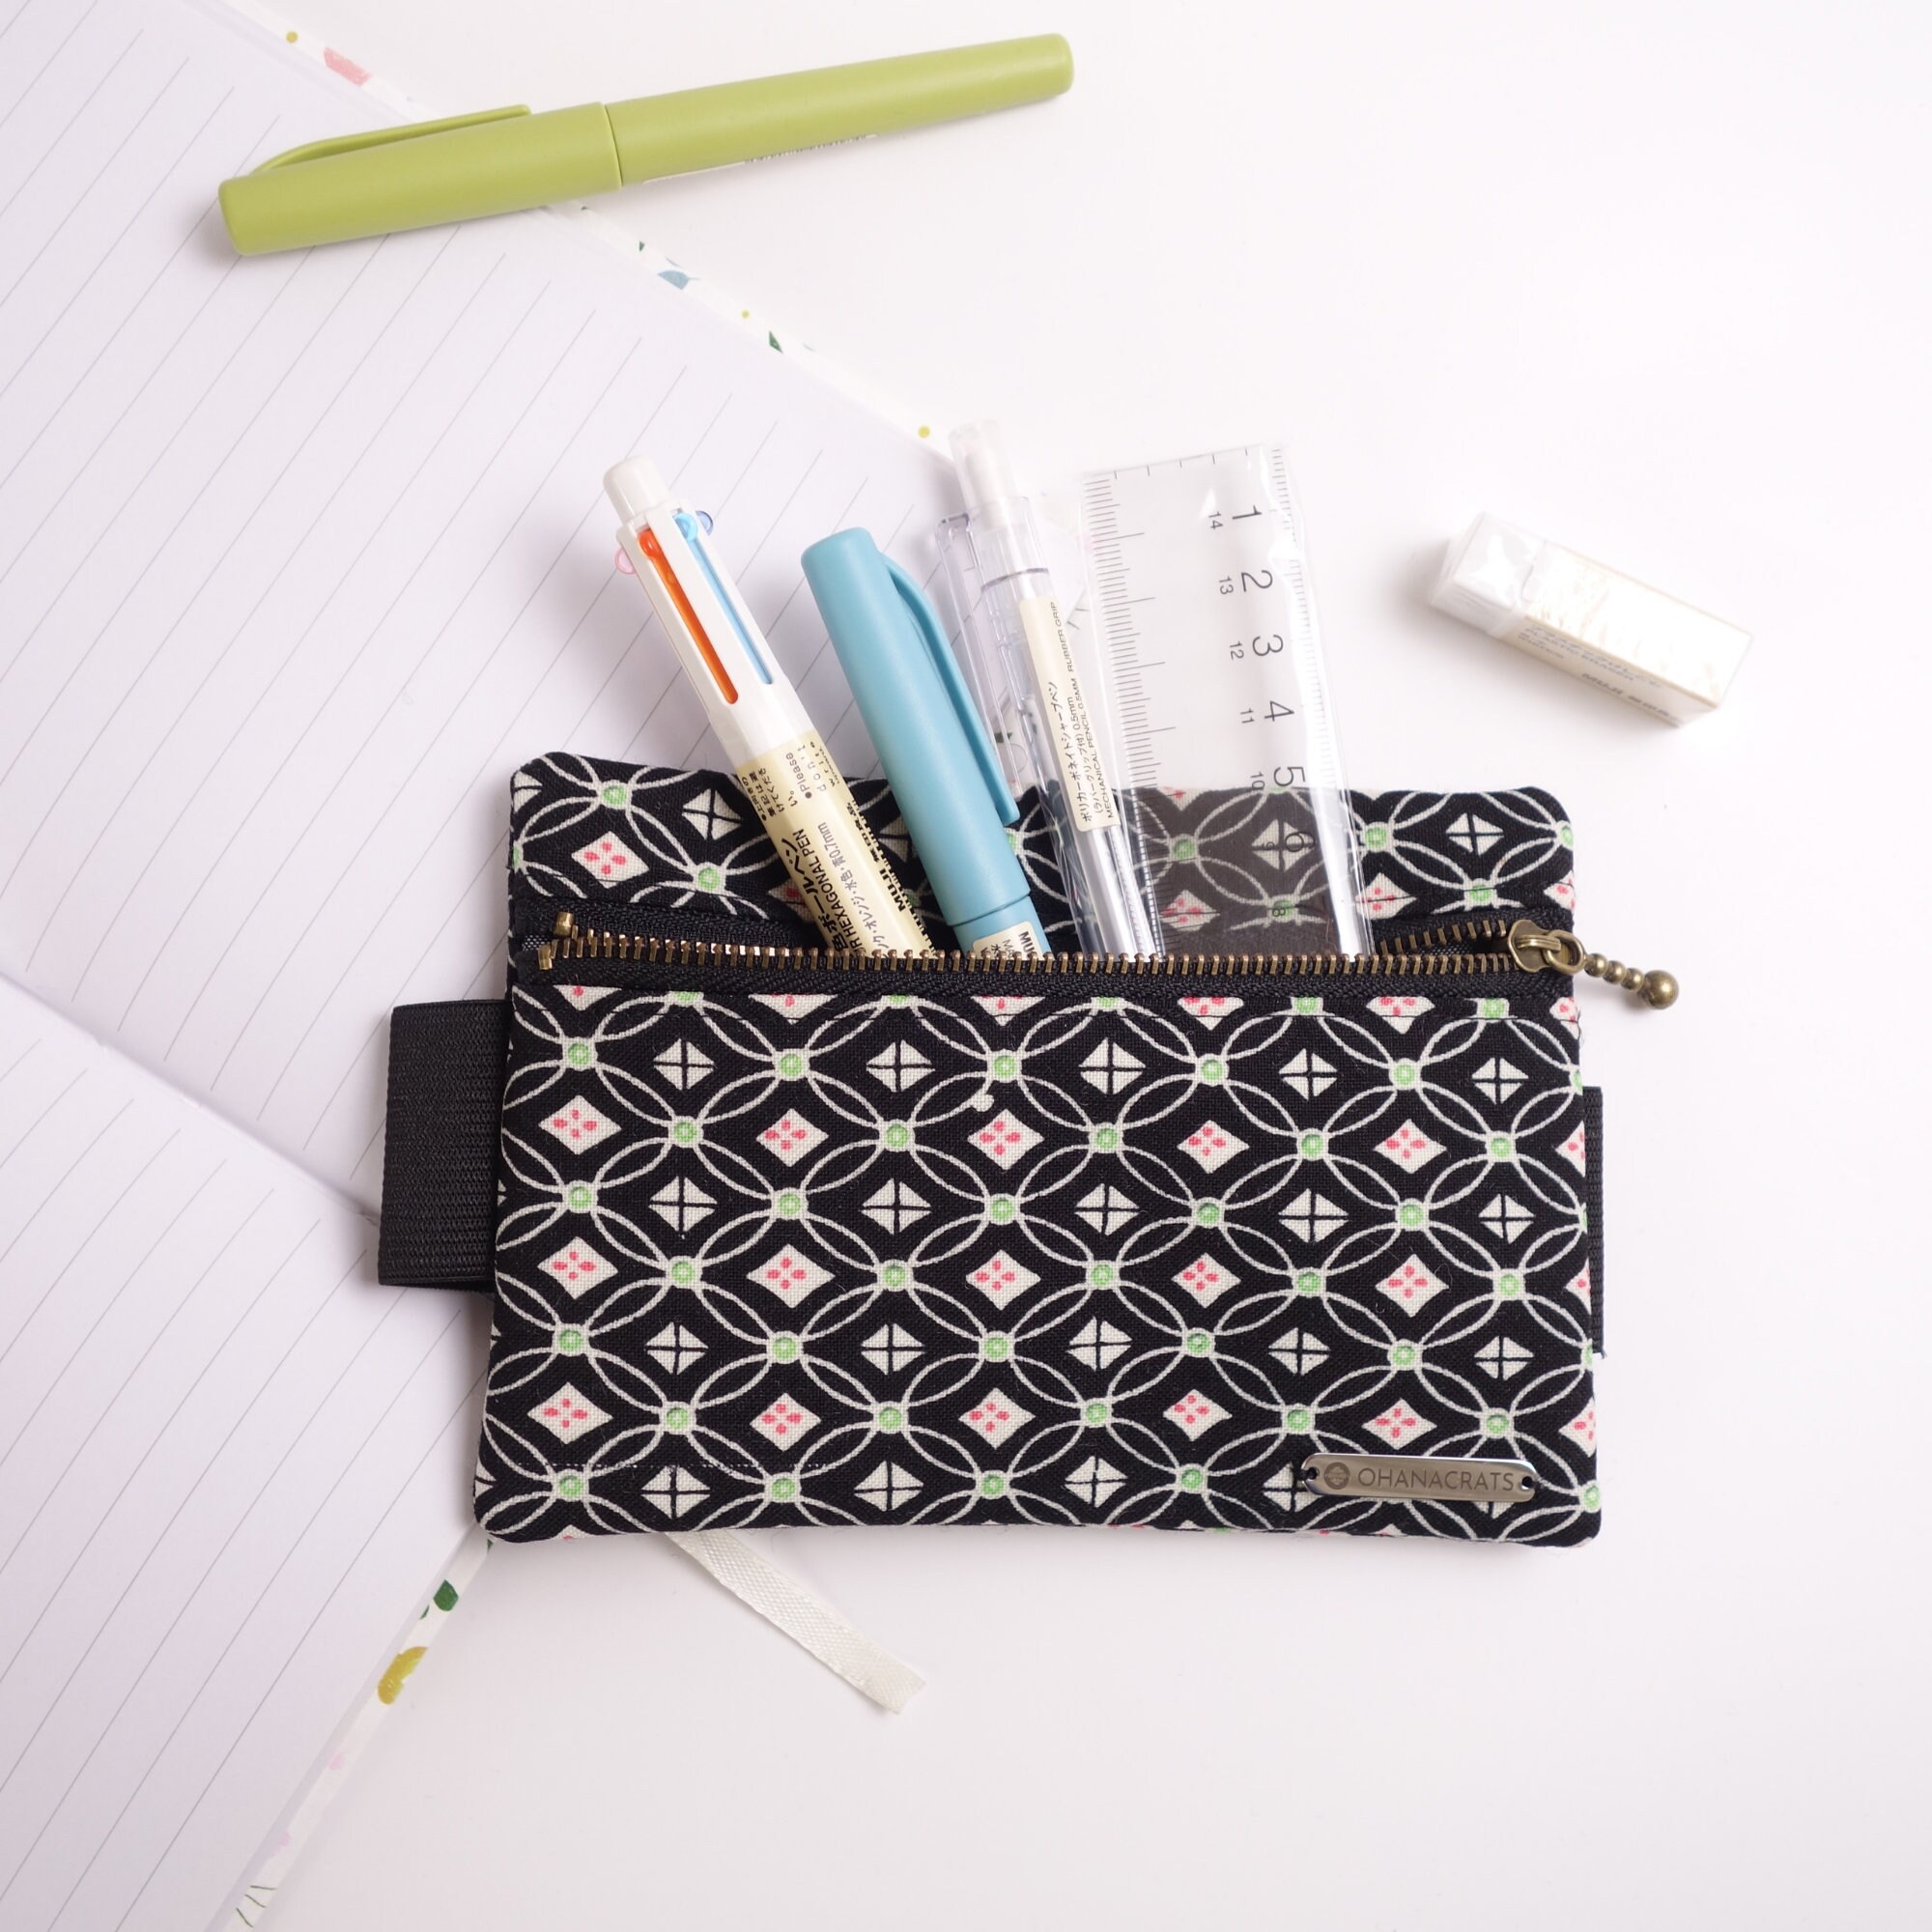  Adjustable Pen Holder Pencil Holder, Elastic Band Pen Pouch  Sleeve for Hardcover Journals, Notebooks, Planners, Binders. Fits Regular &  Large Notebooks. Hold Multi Pens, Detachable. : Office Products